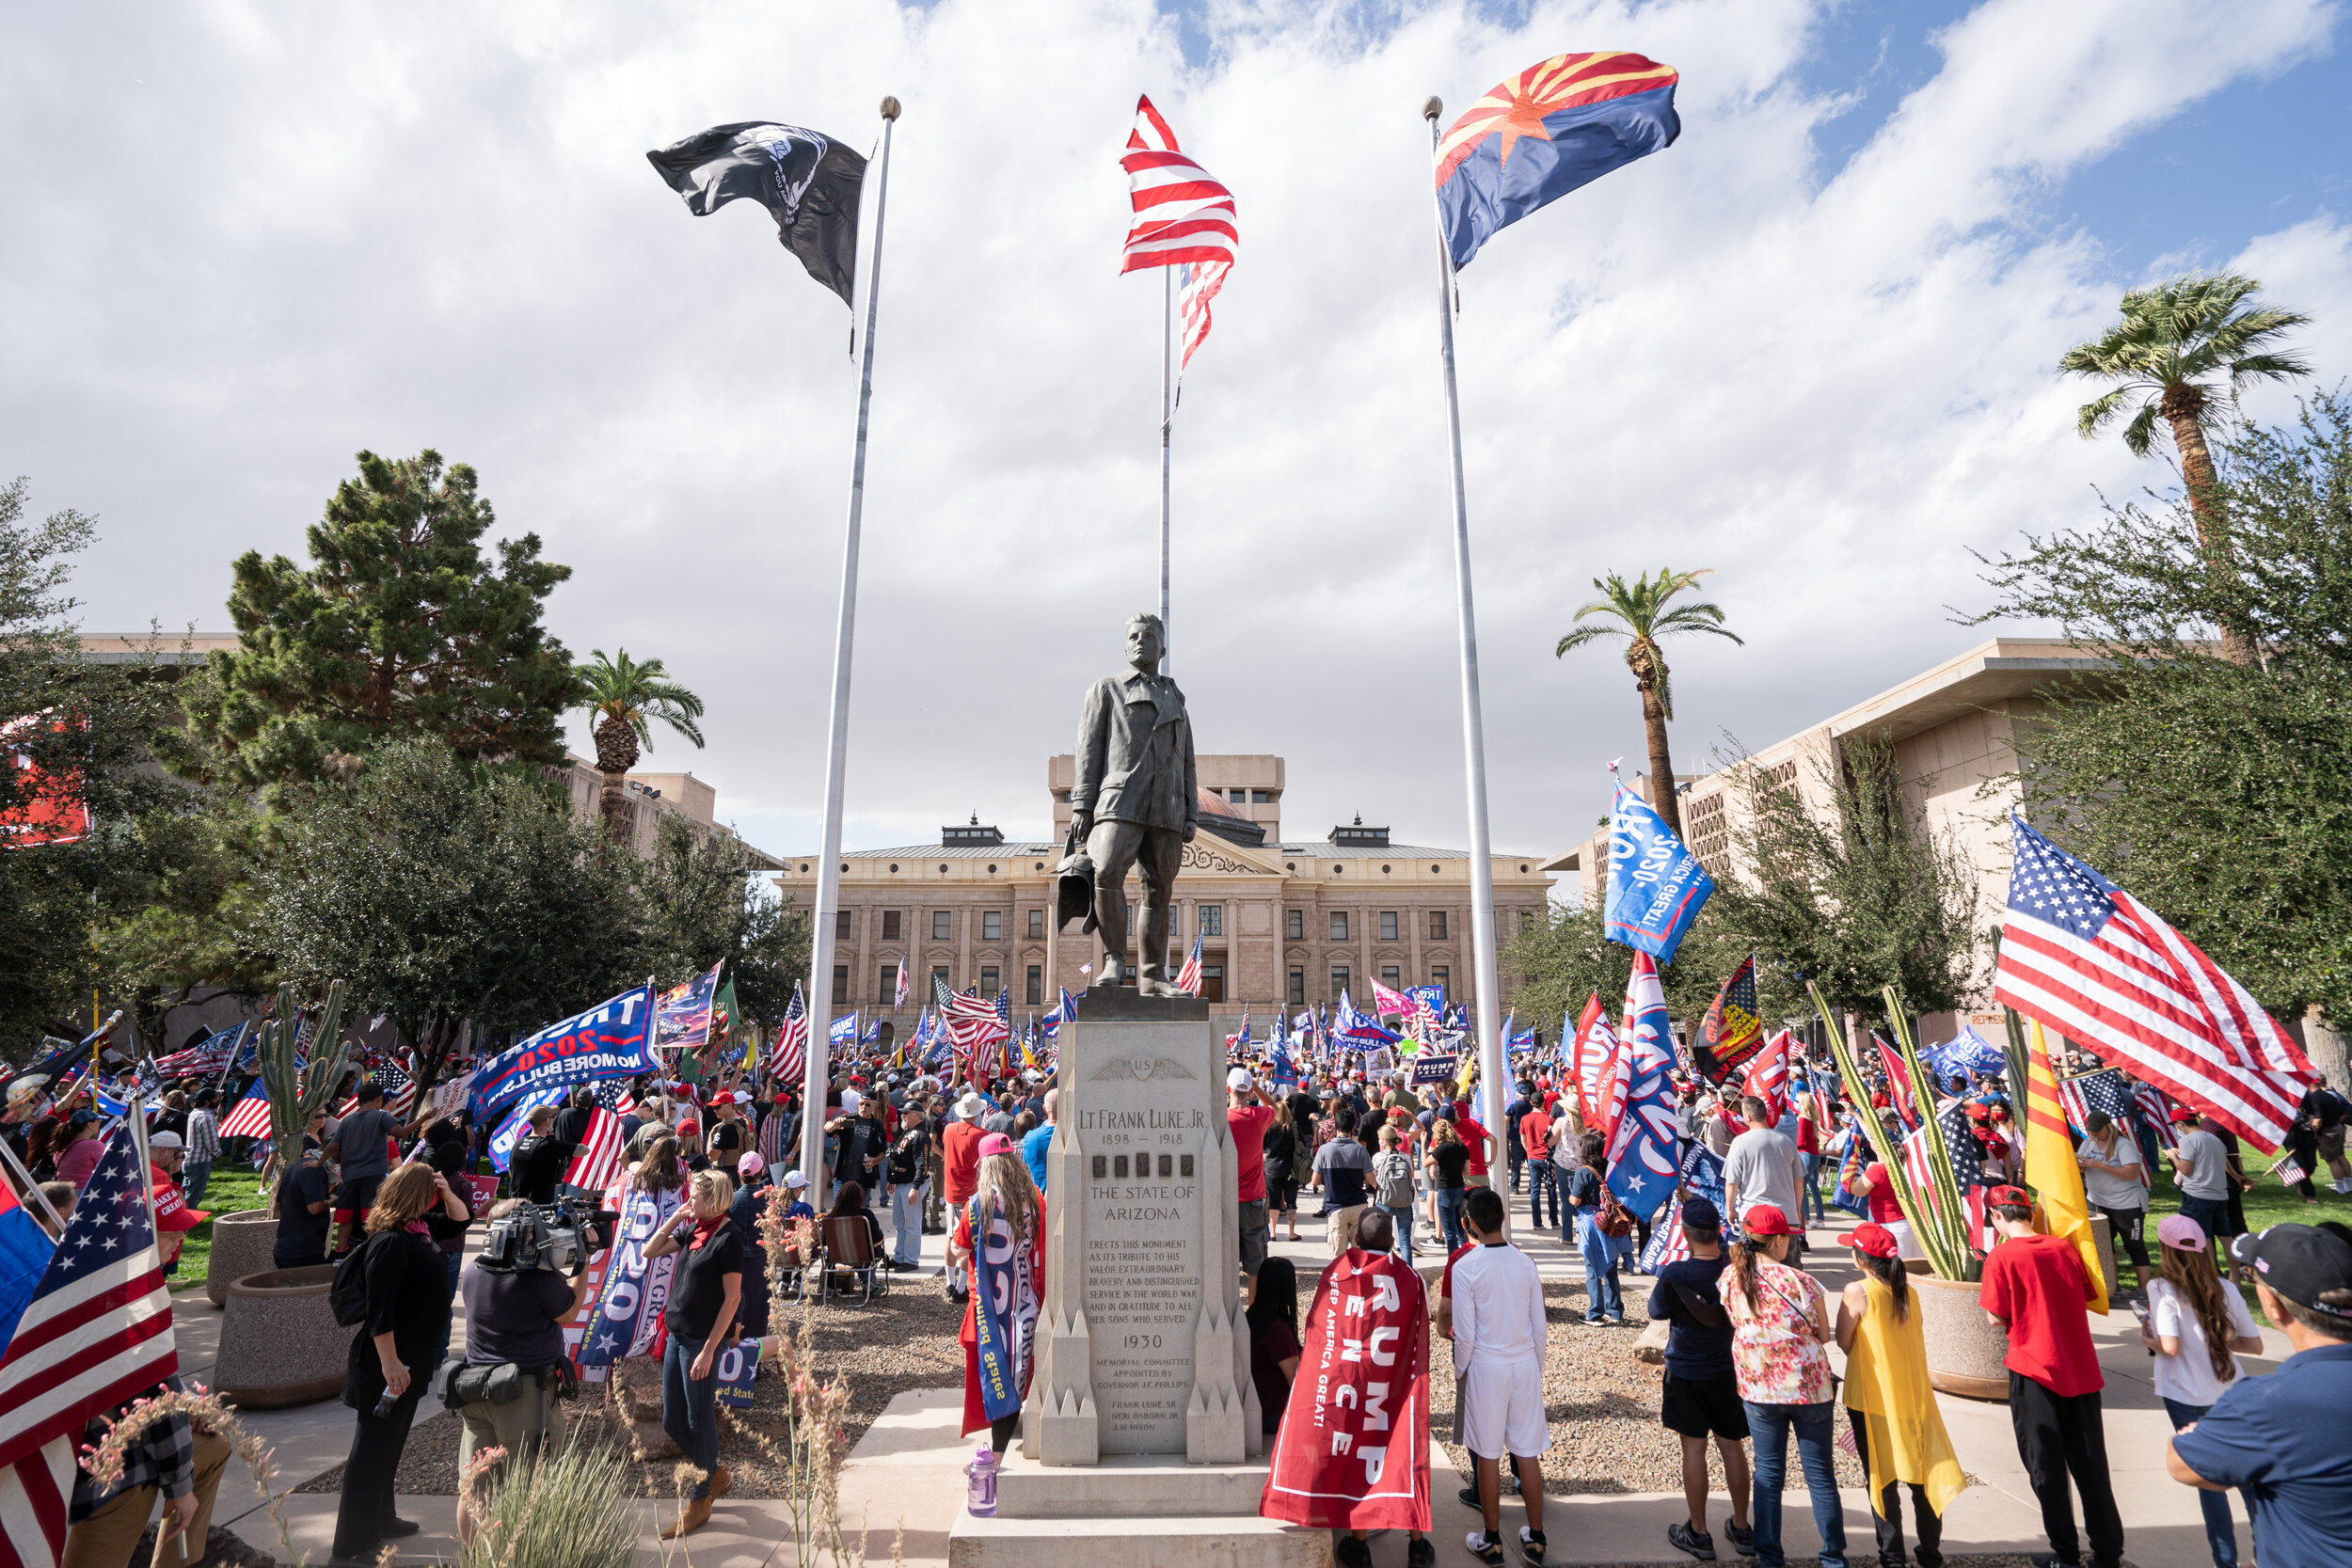  Trump supporters gather at the Arizona State Capital in Phoenix, Arizona to protest the election results. 